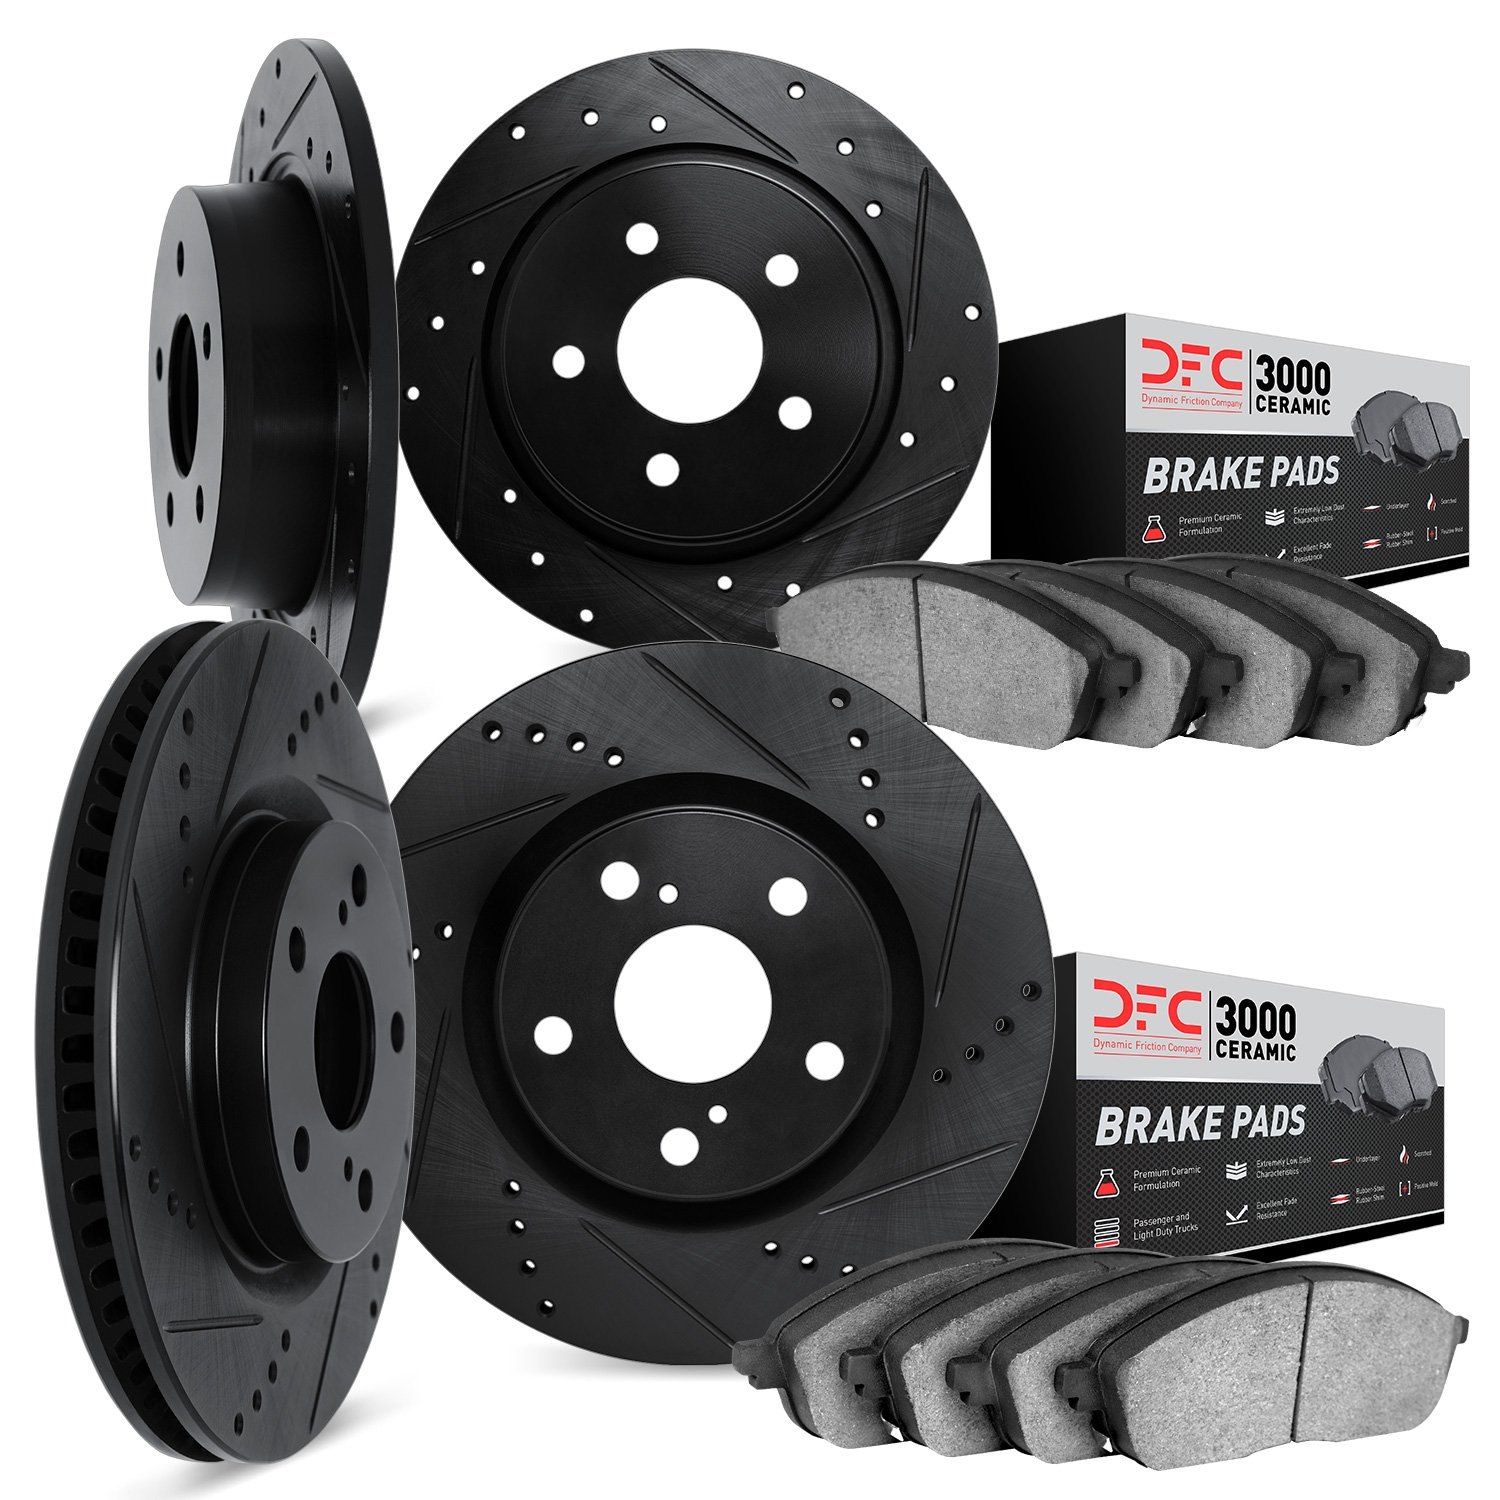 8304-01005 Drilled/Slotted Brake Rotors with 3000-Series Ceramic Brake Pads Kit [Black], 2007-2014 Suzuki, Position: Front and R